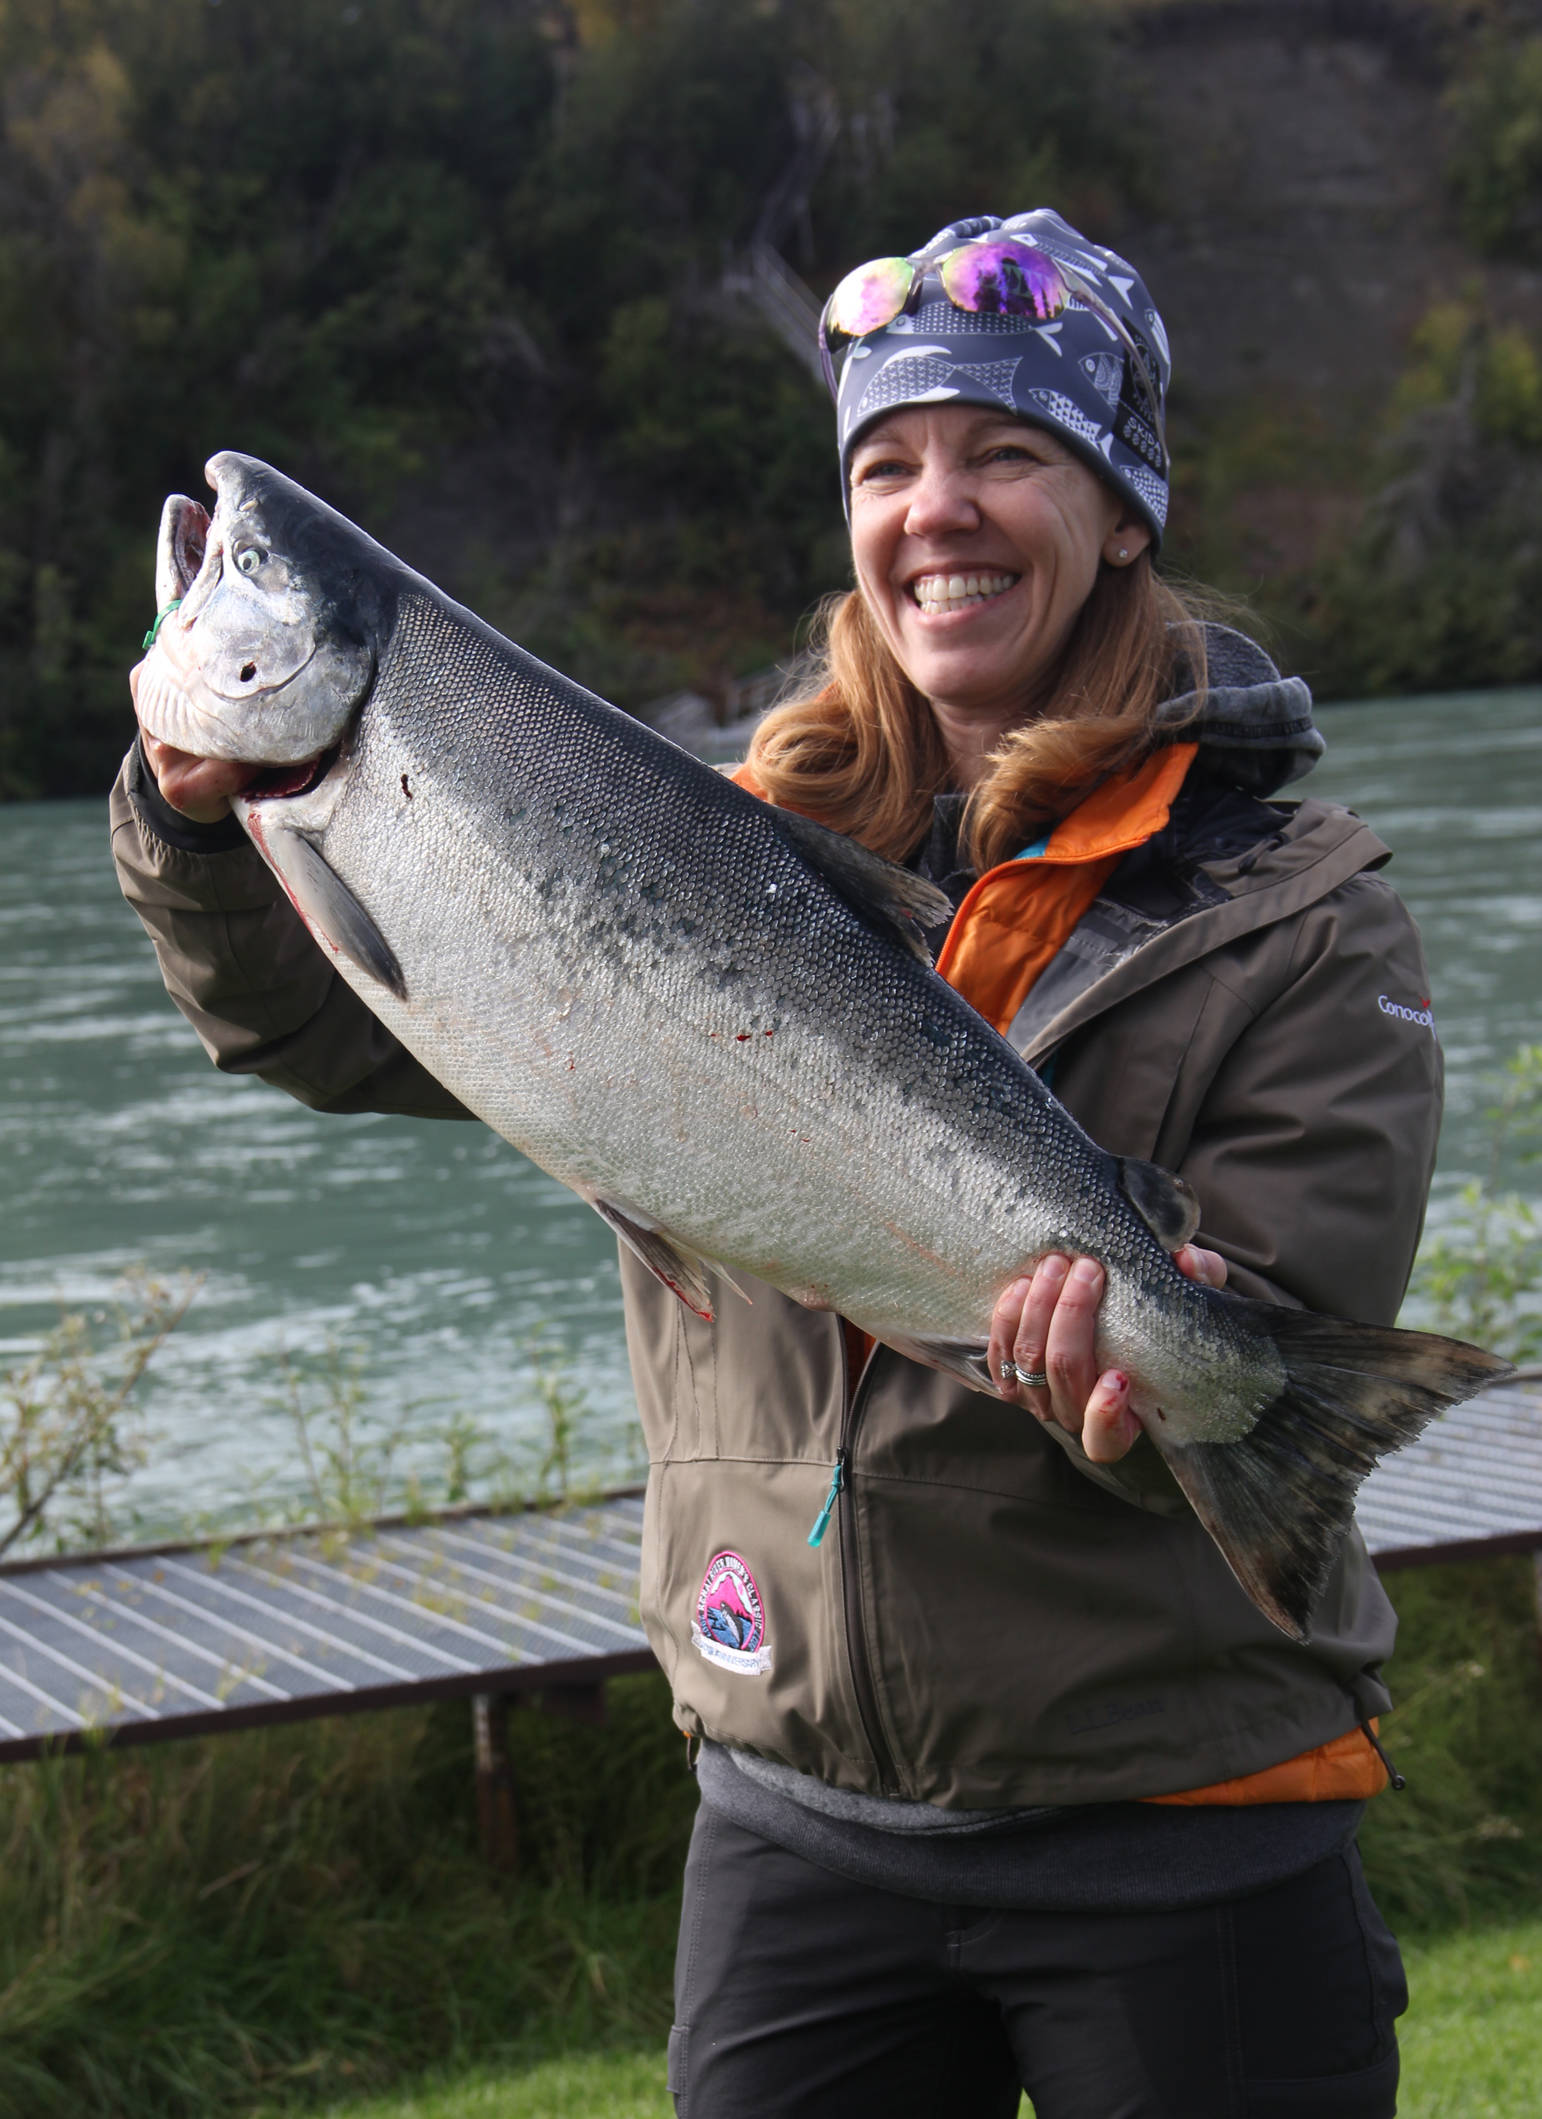 Dr. Nancy Kragt wins the Women’s Classic with a 14.1-pound coho salmon.